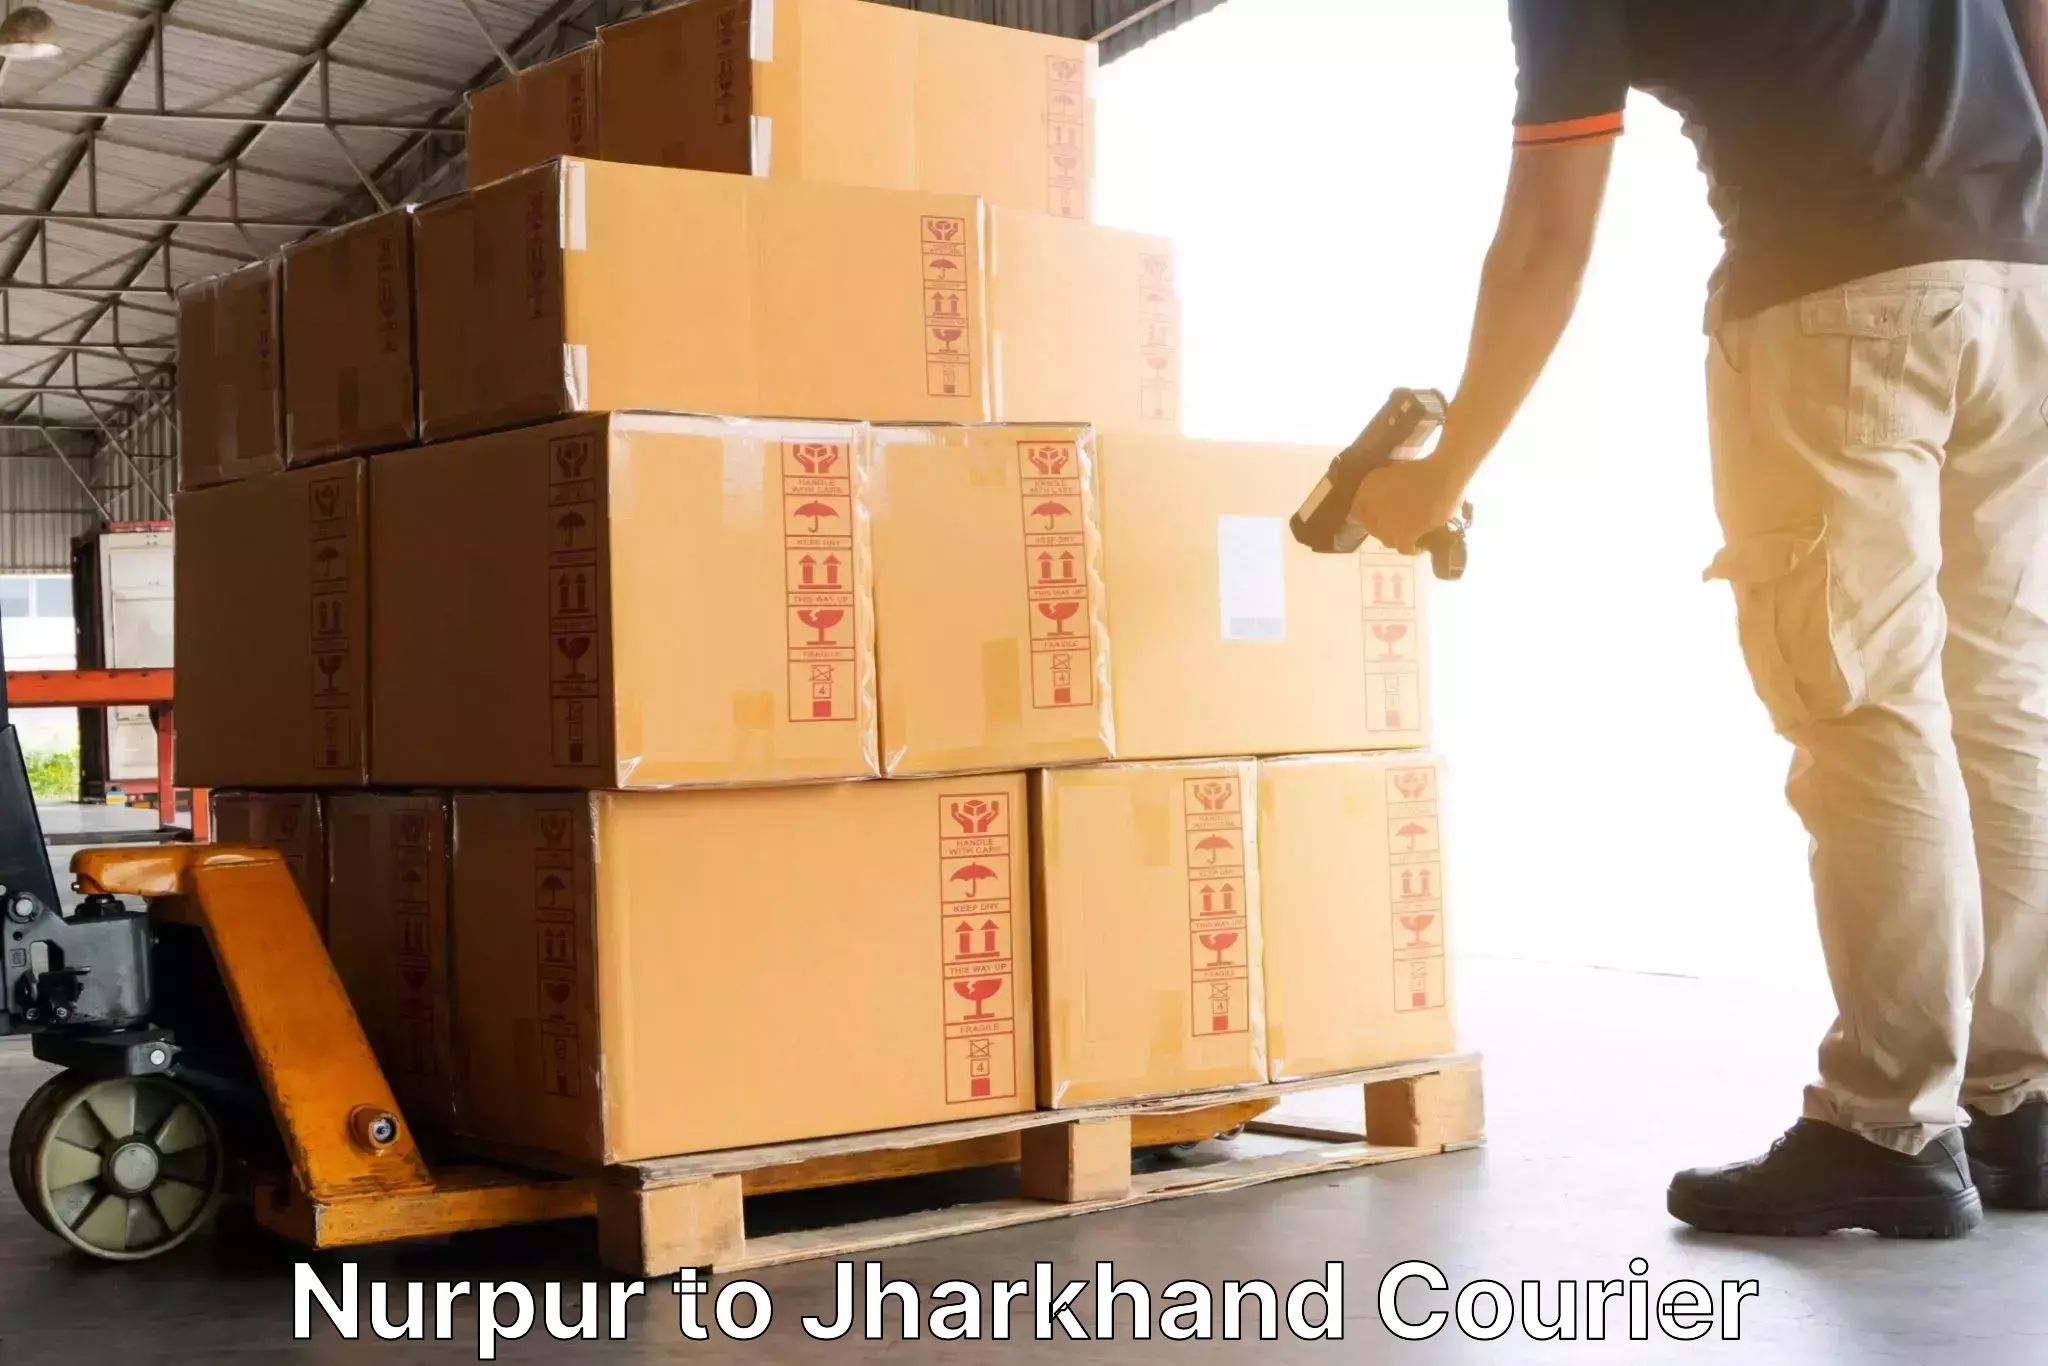 High-speed delivery in Nurpur to Bokaro Steel City